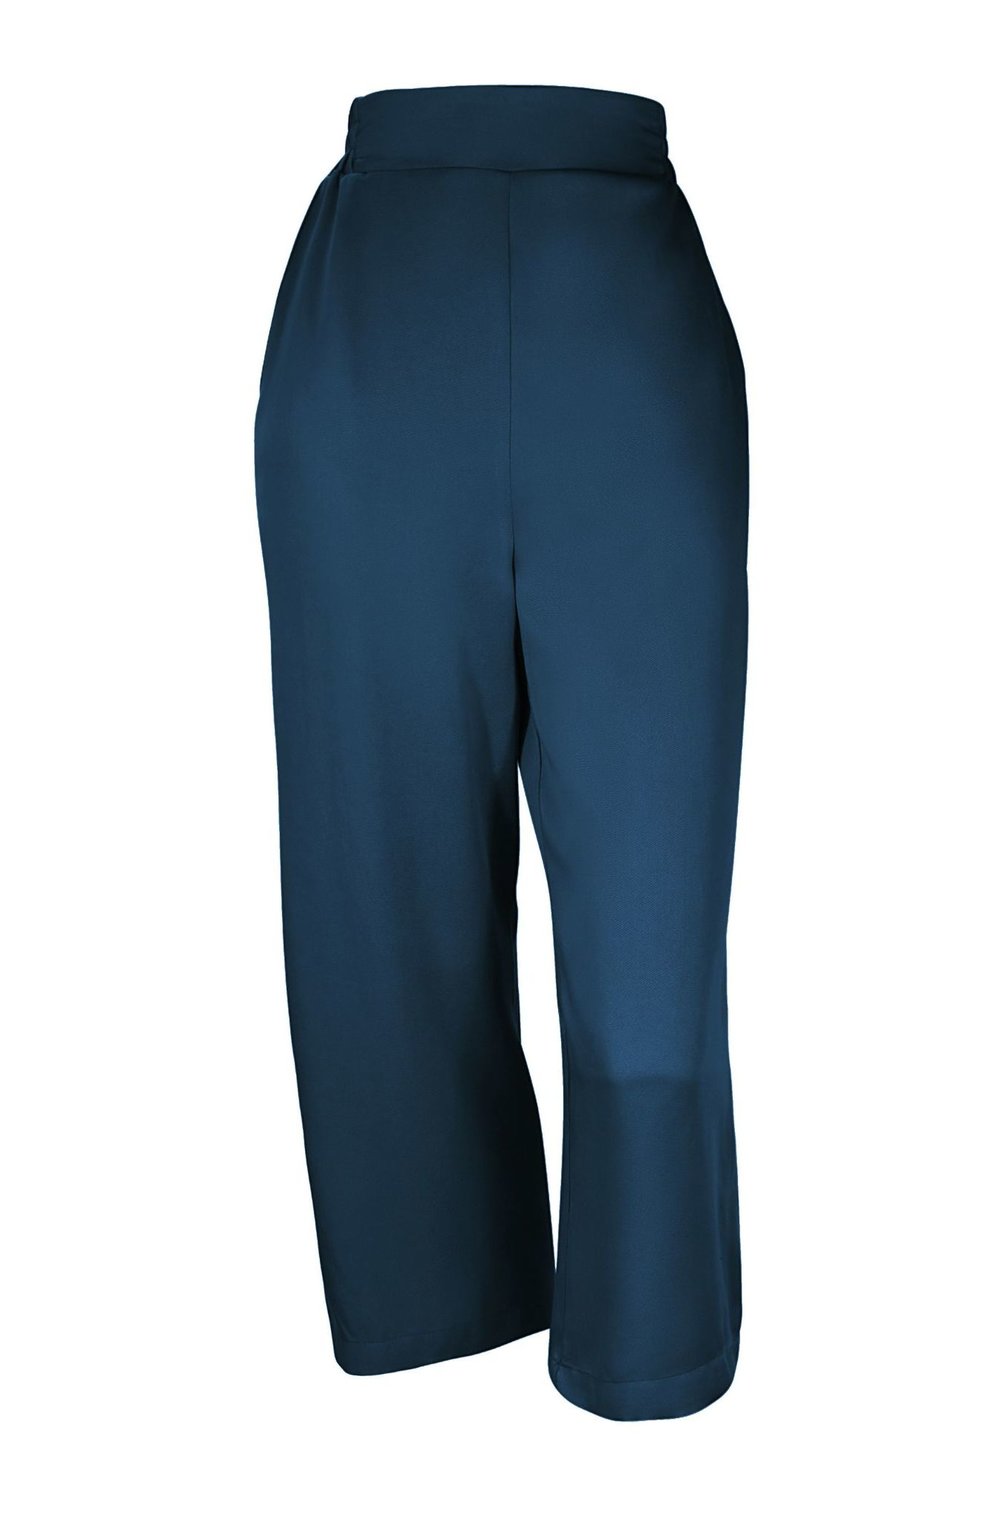 Helene Pants by Melow, Peacock Blue, 7/8 length, fluid shape, high waist, elastic waist, eco-friendly fabric, lyocell, OEKO-TEX certified, sizes XS to XXL, made in Montreal.